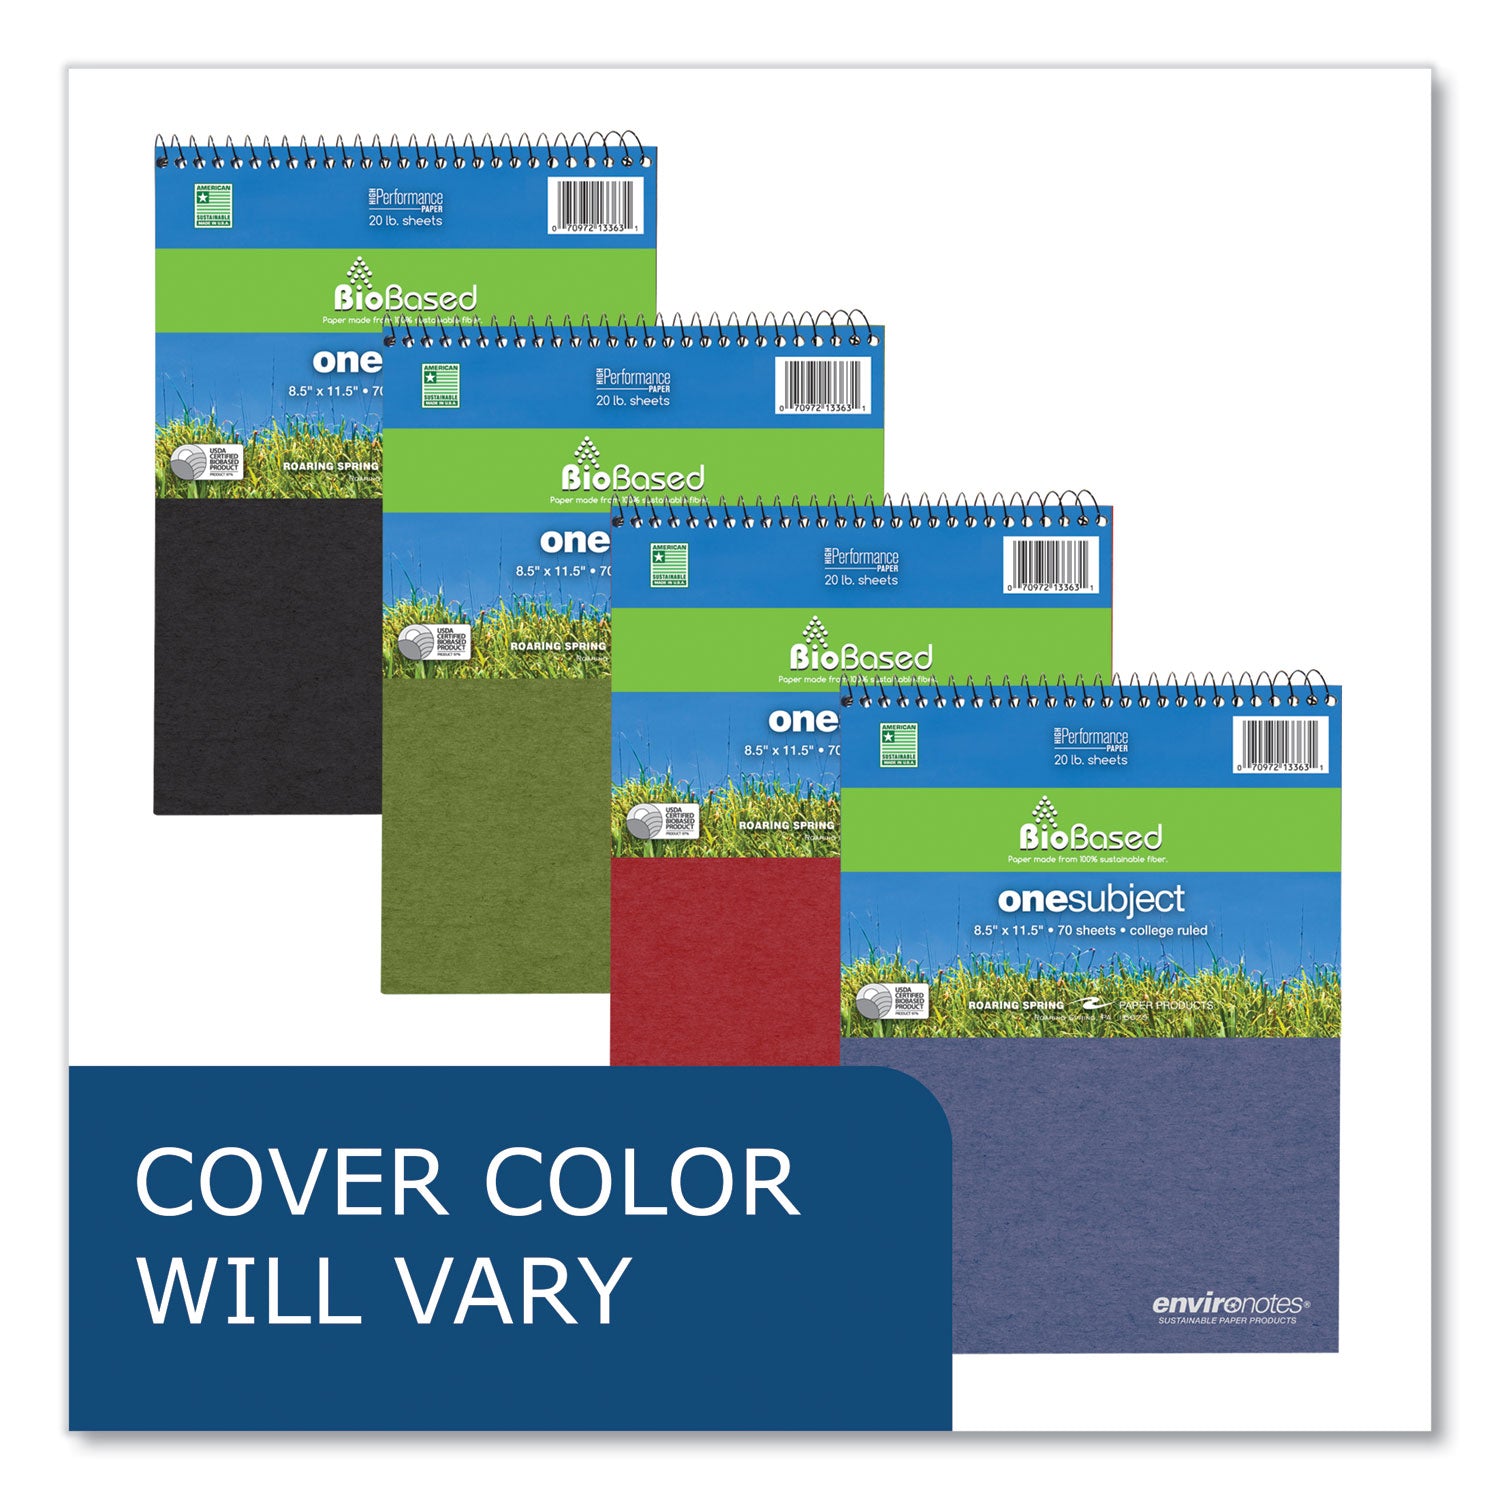 earthtones-biobased-1-subject-notebook-med-college-rule-asst-covers-70-85x115-sheets-24-ct-ships-in-4-6-bus-days_roa13363cs - 6